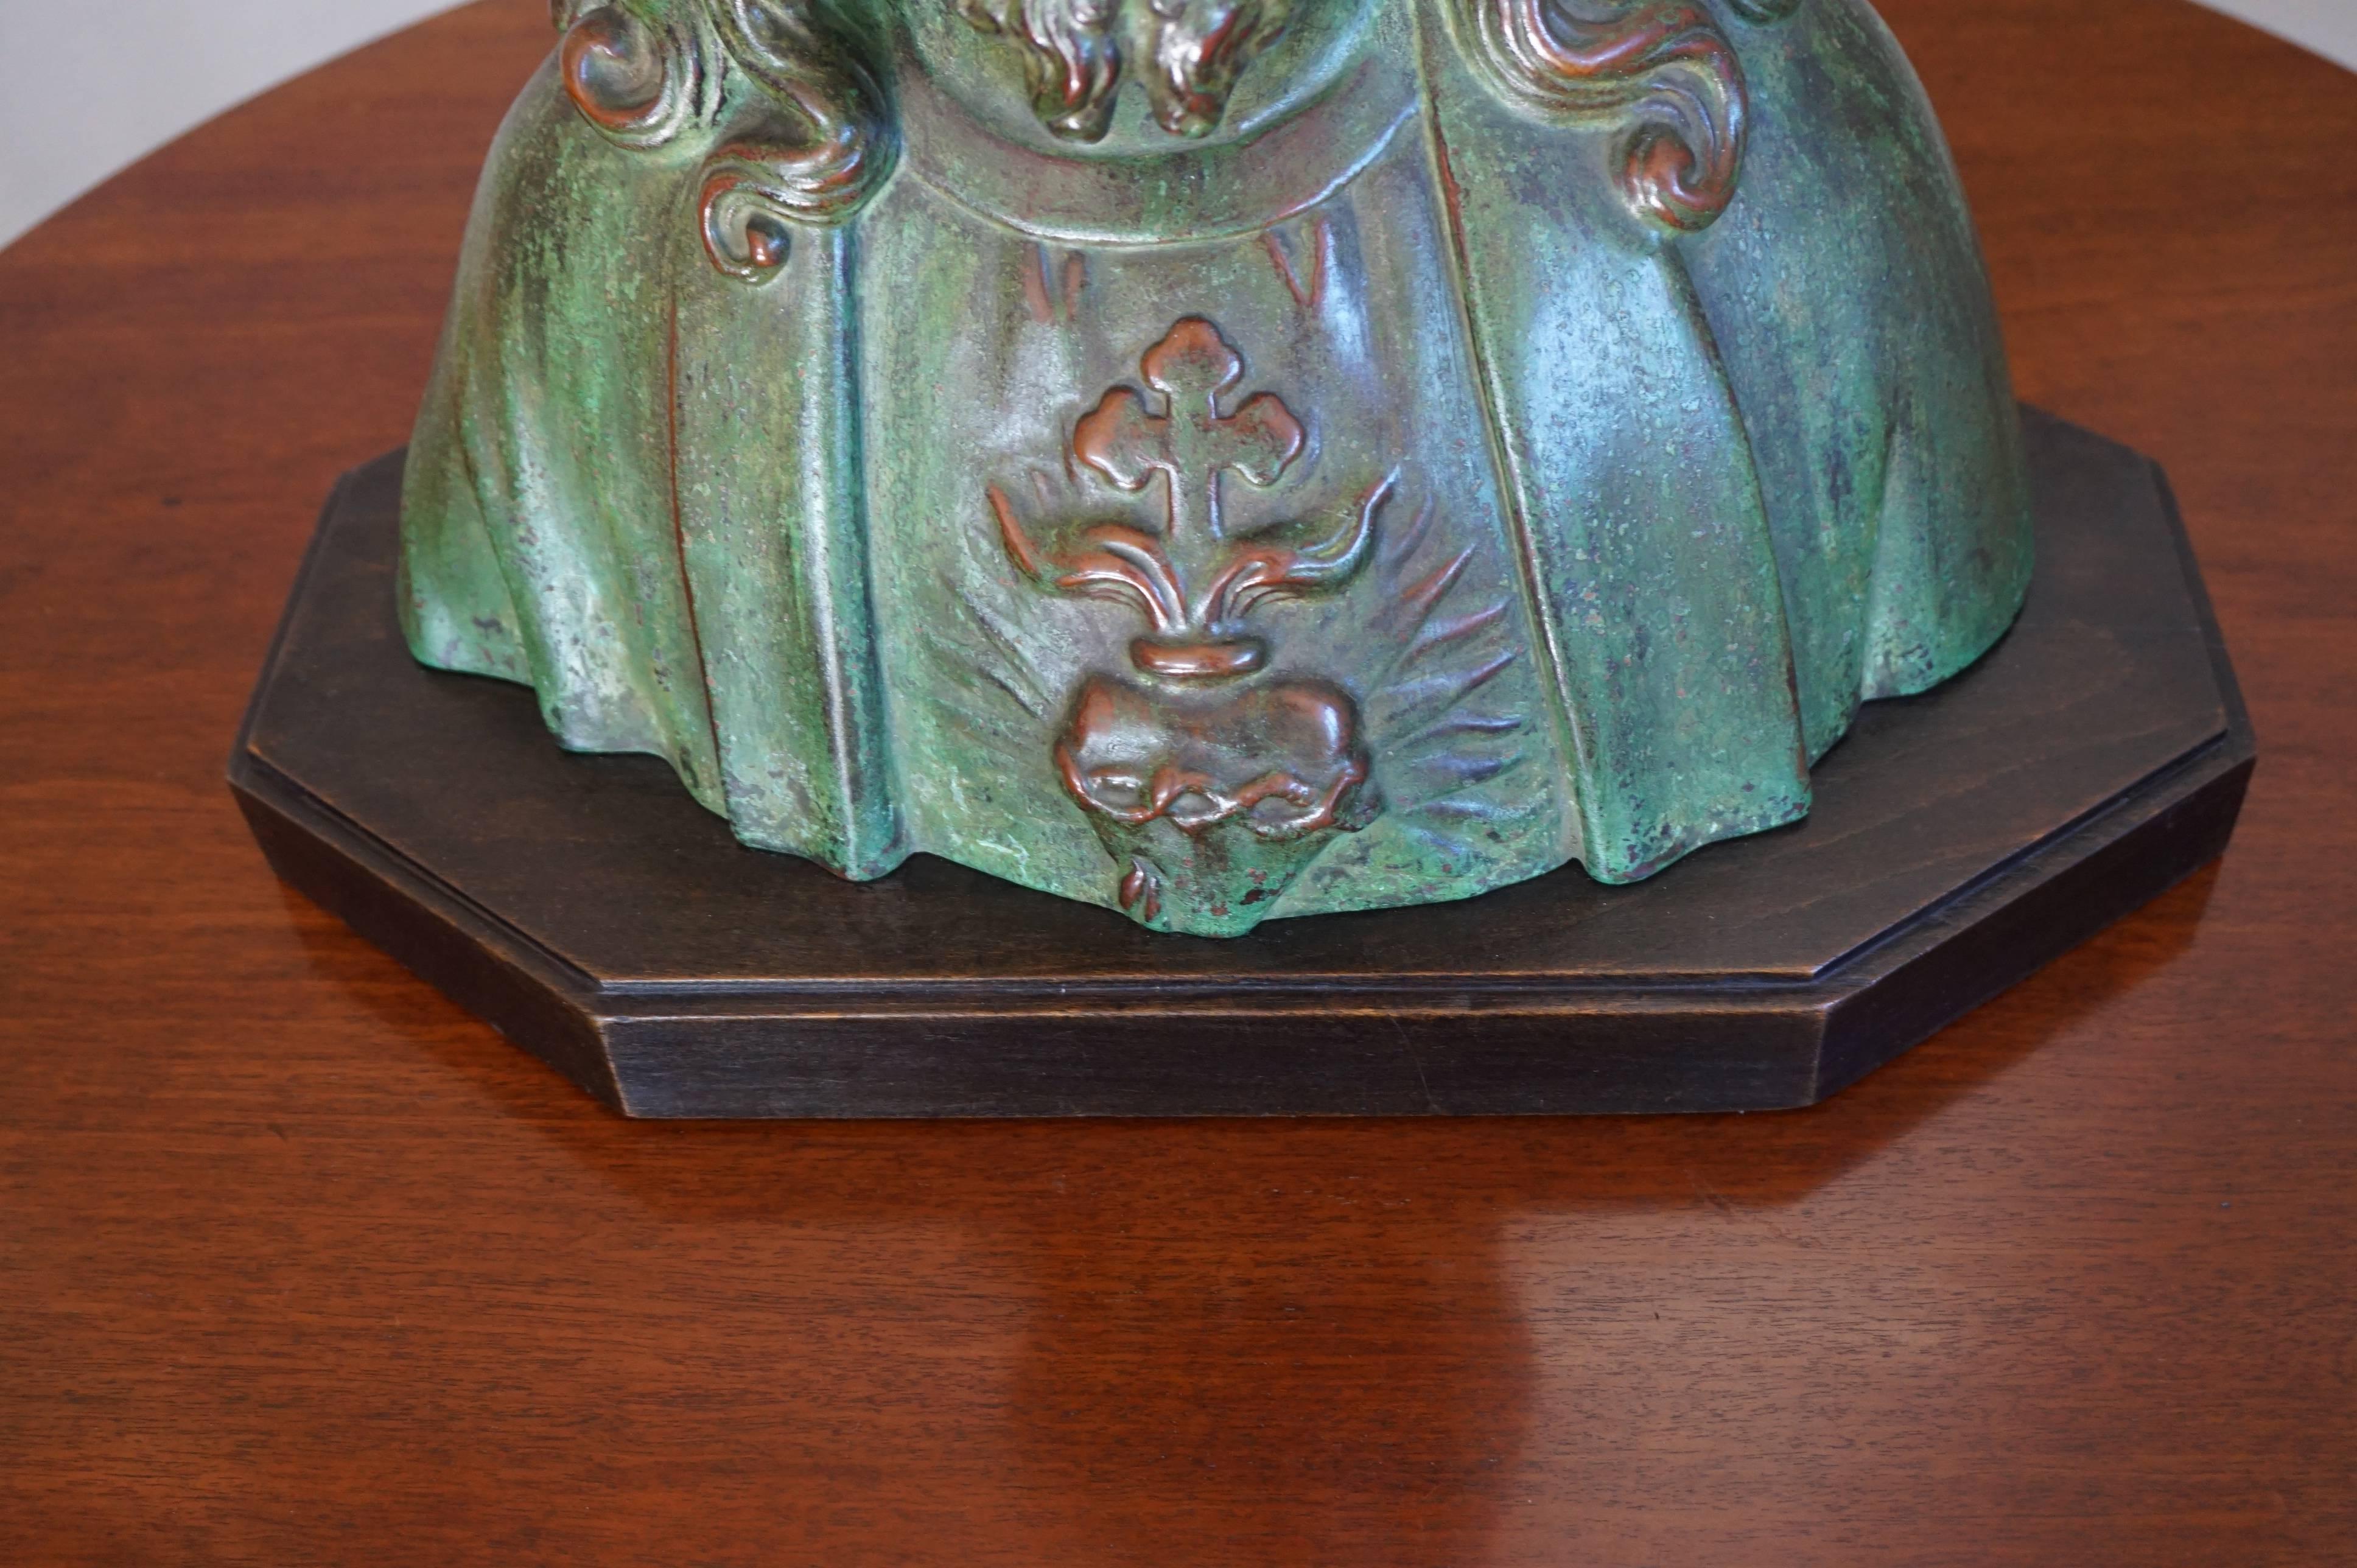 Ebonized Early 1900s Patinated Terracotta or Plaster Bust of Christ on an Art Deco Base